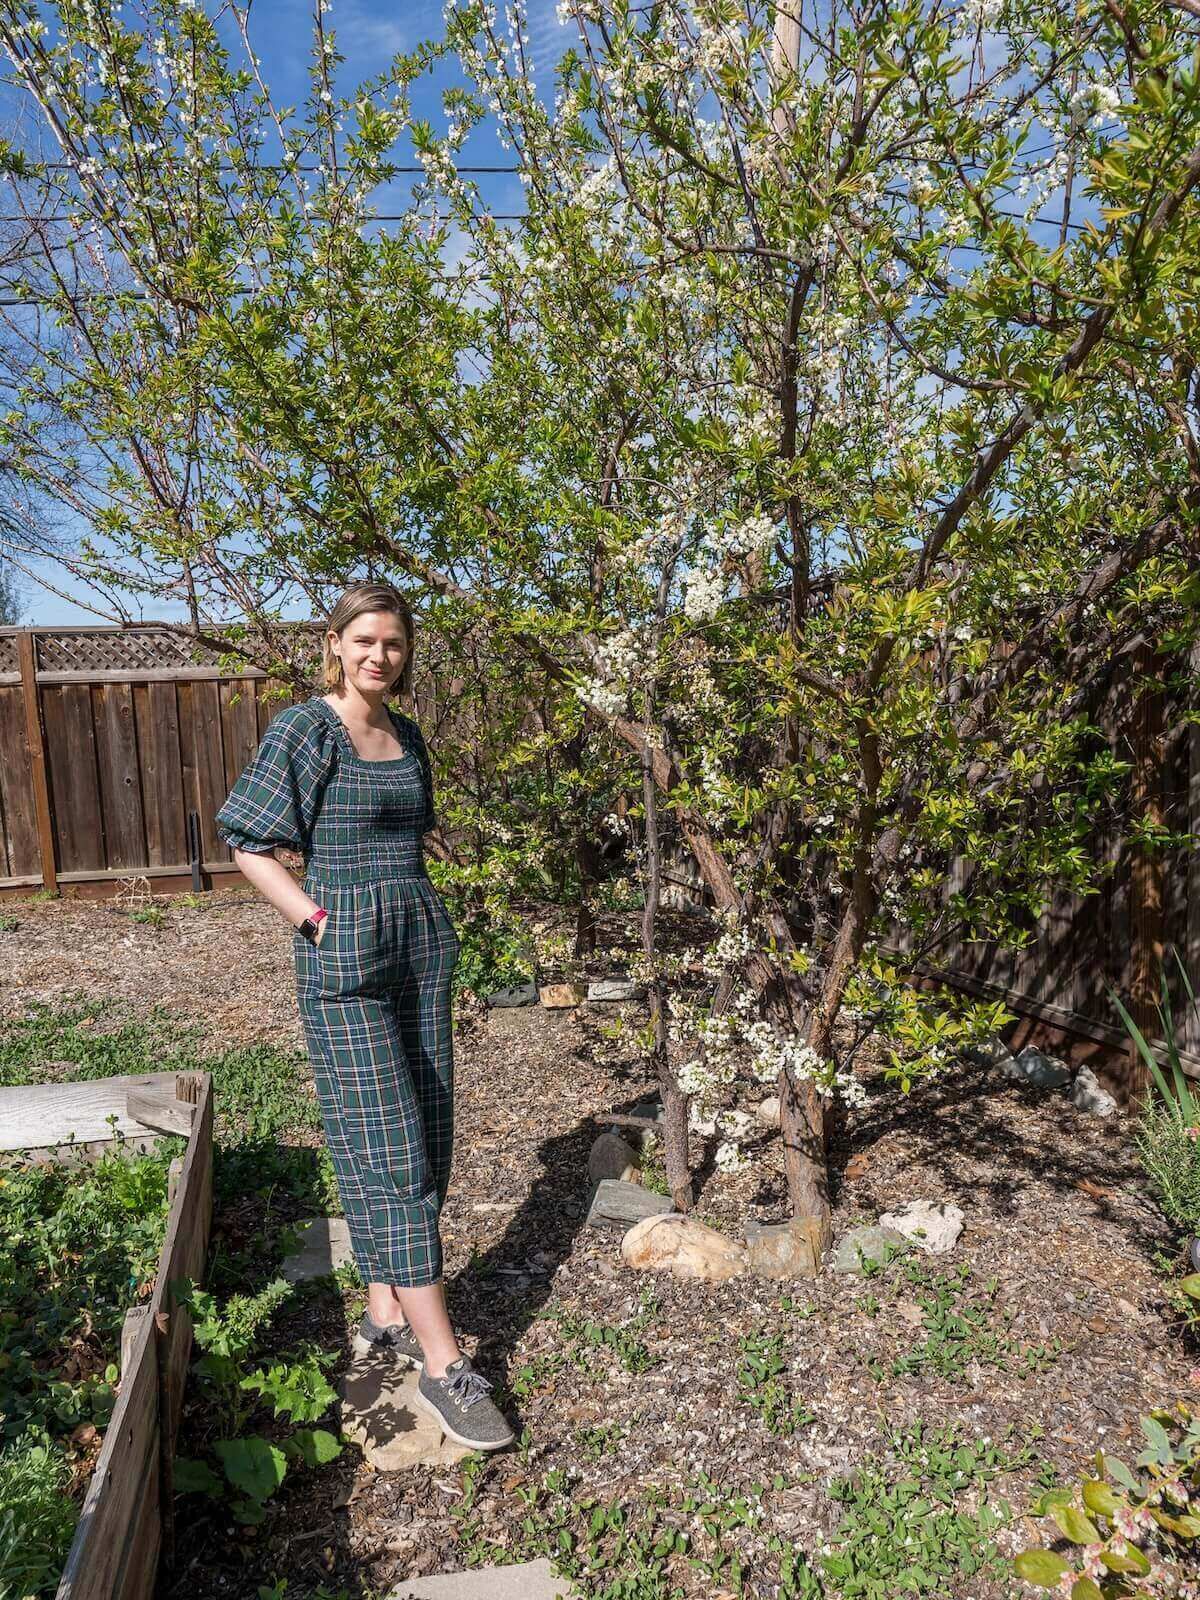 A young woman wearing a plaid jumpsuit and grey sneakers poses next to a planter box in a green garden, with a tree behind her.